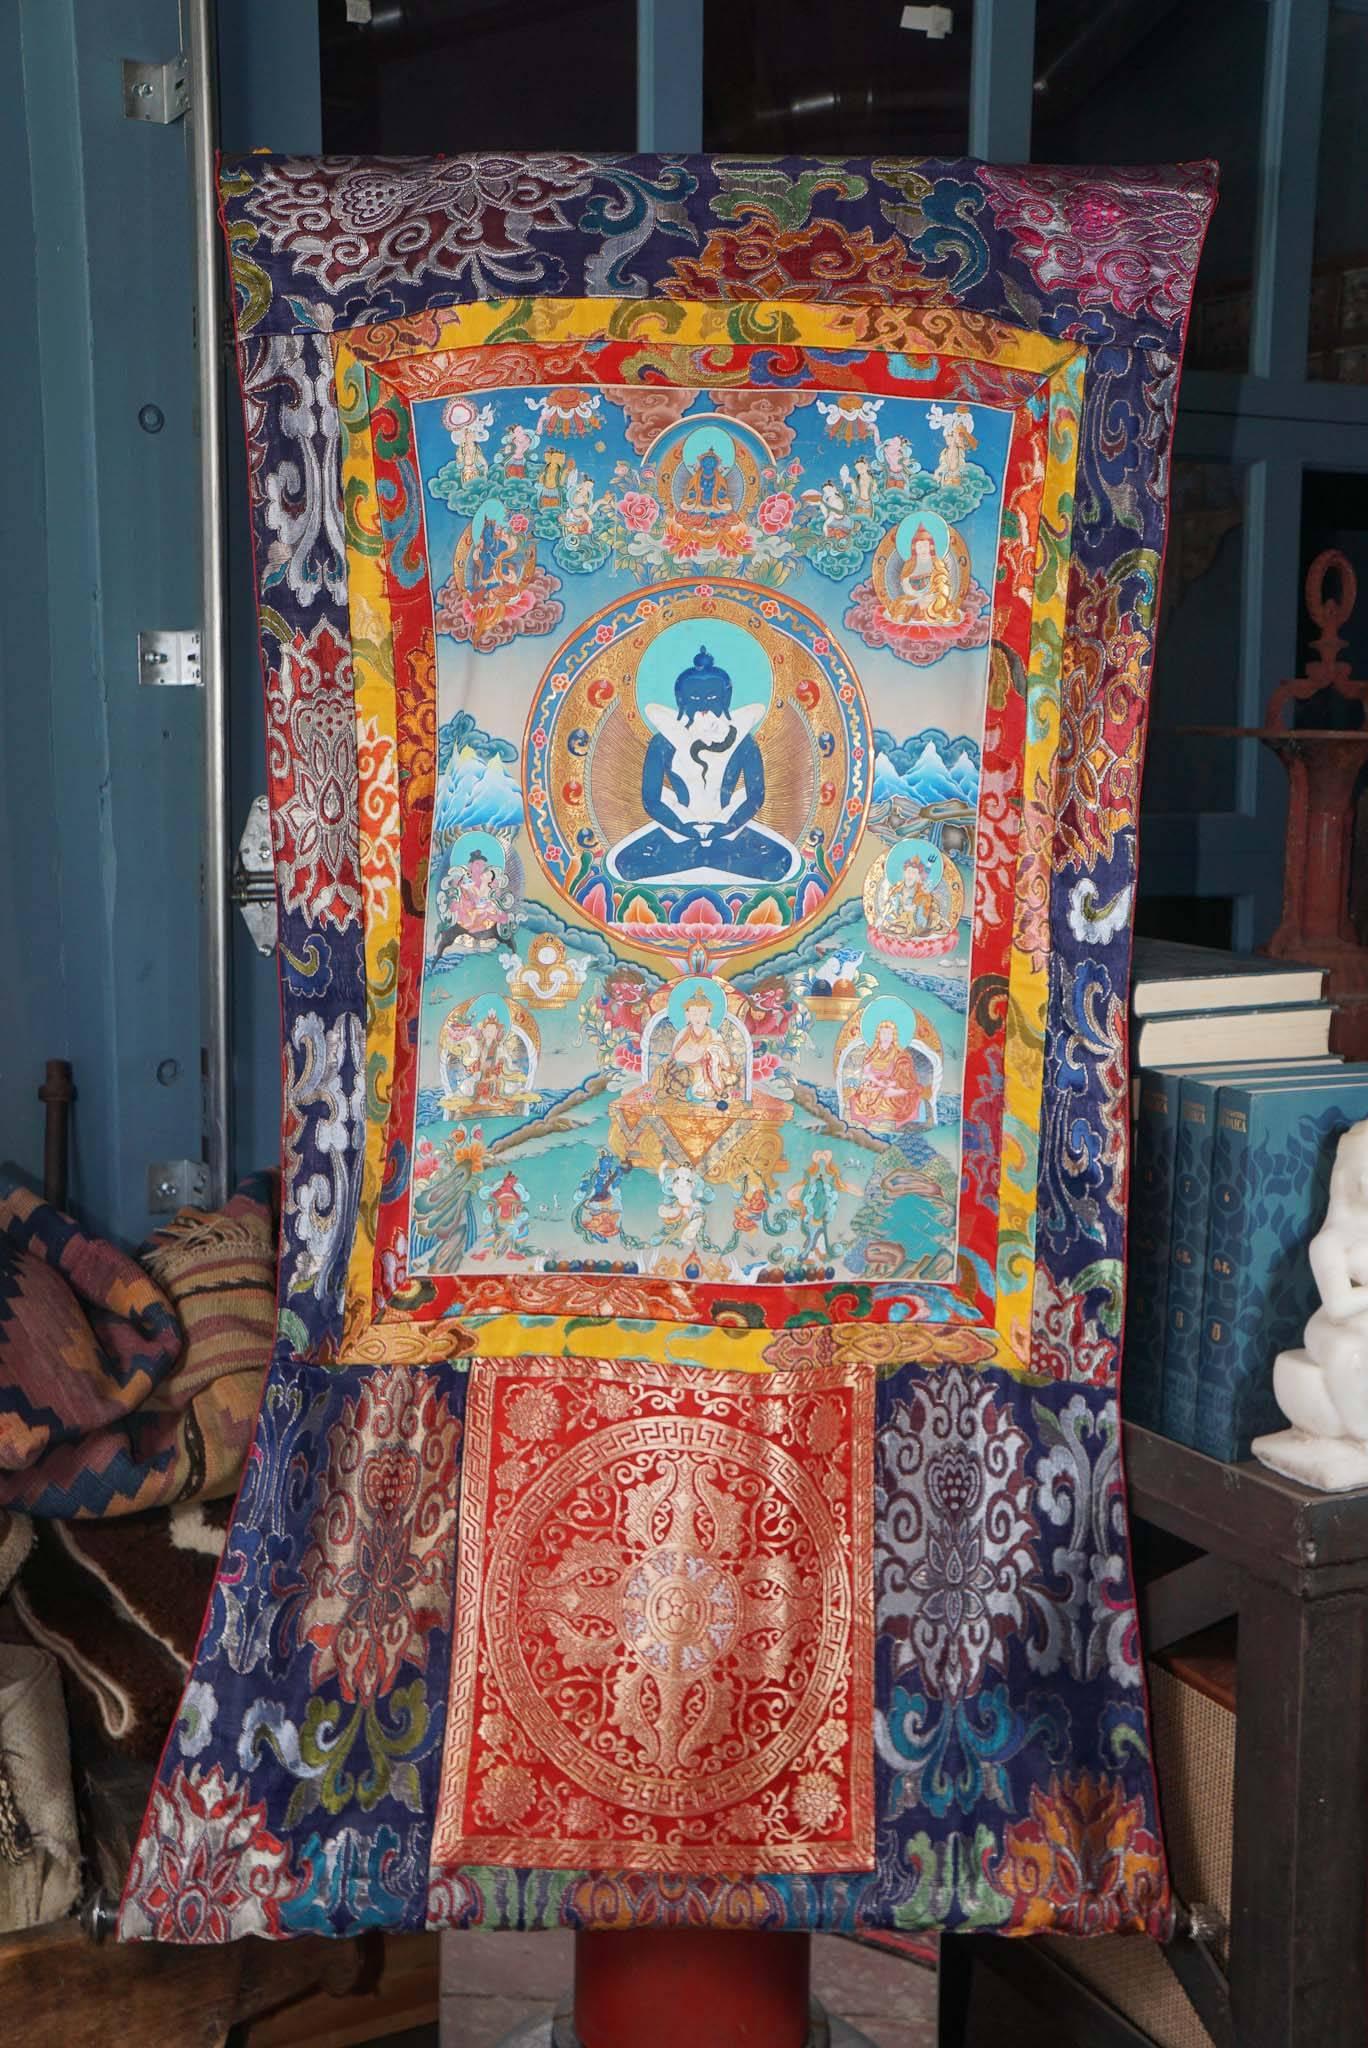 This silk, hand-painted Thankha is notable for the quality of the preservation of the paint, as well as for the number and elaboration of its panels and vivid colors. A very lovely modern (20th century) piece done in a traditional style. (Tibetan or